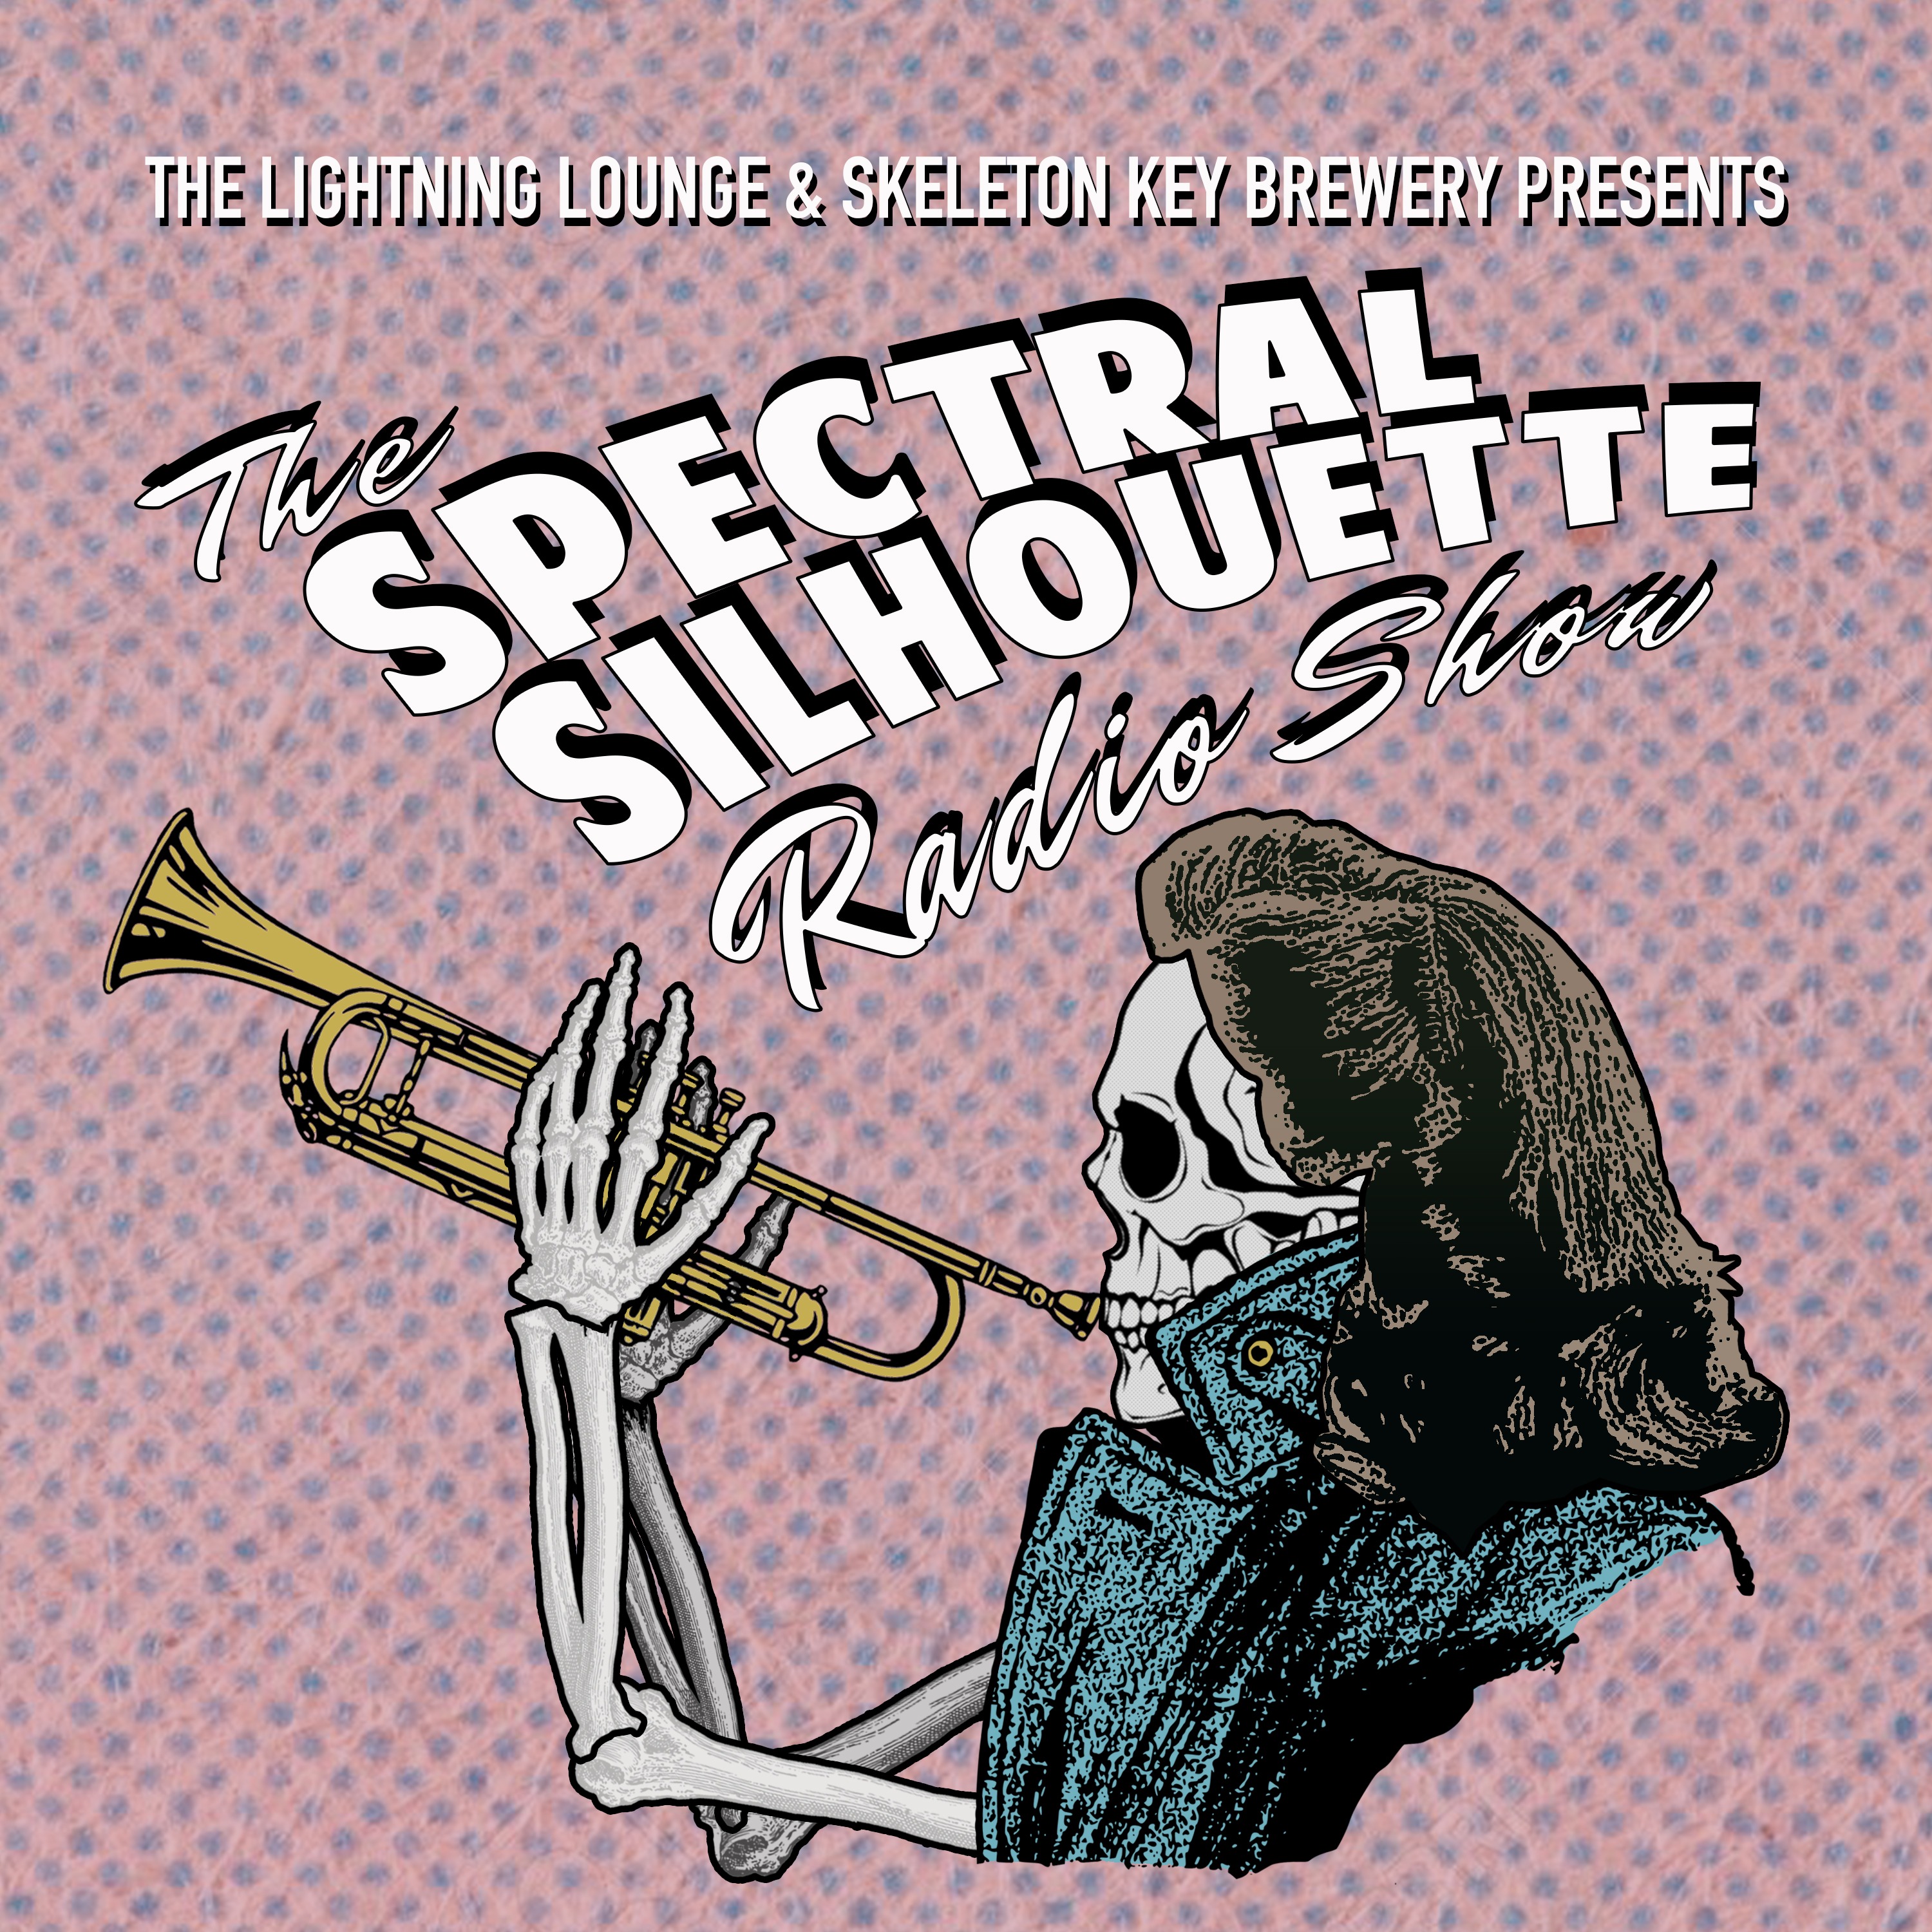 The Spectral Silhouette Radio Show